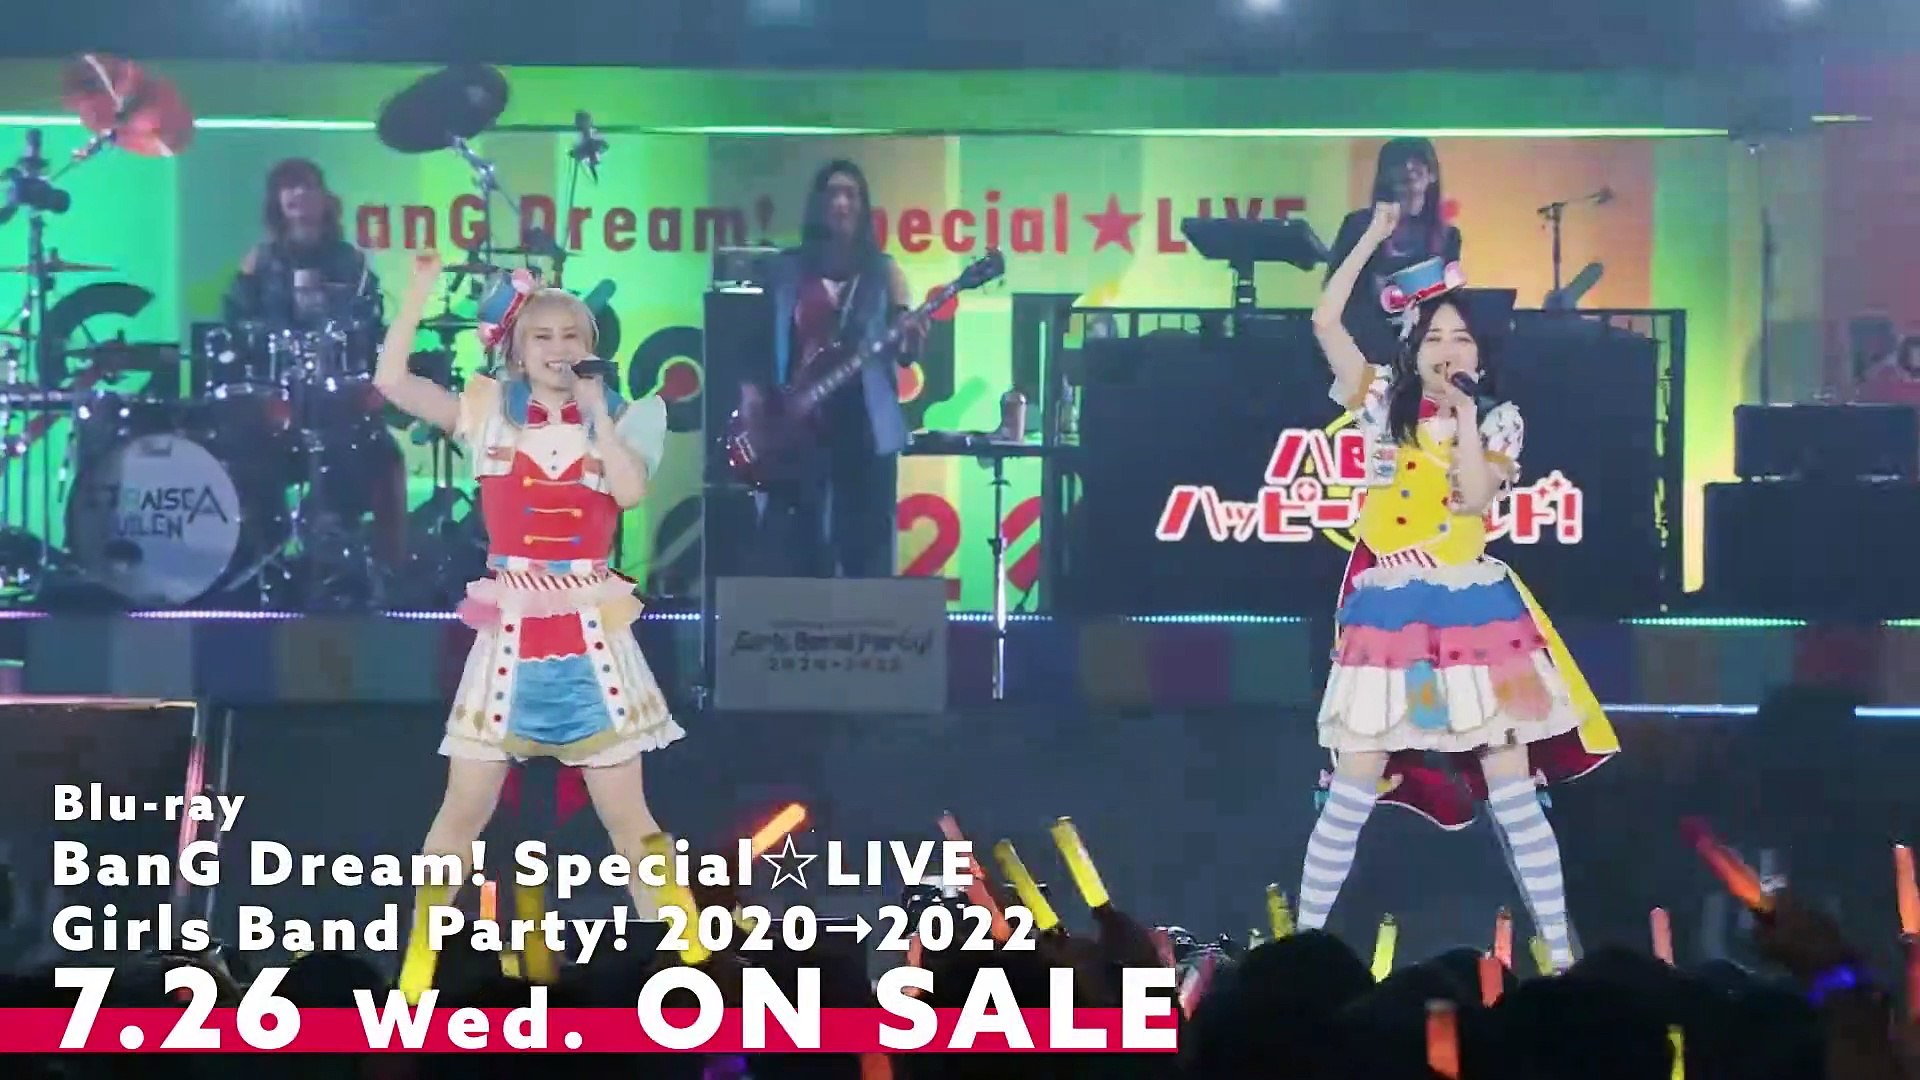 Streaming+] BanG Dream! Special☆LIVE Girls Band Party! 2020→2022 Verified  Tickets